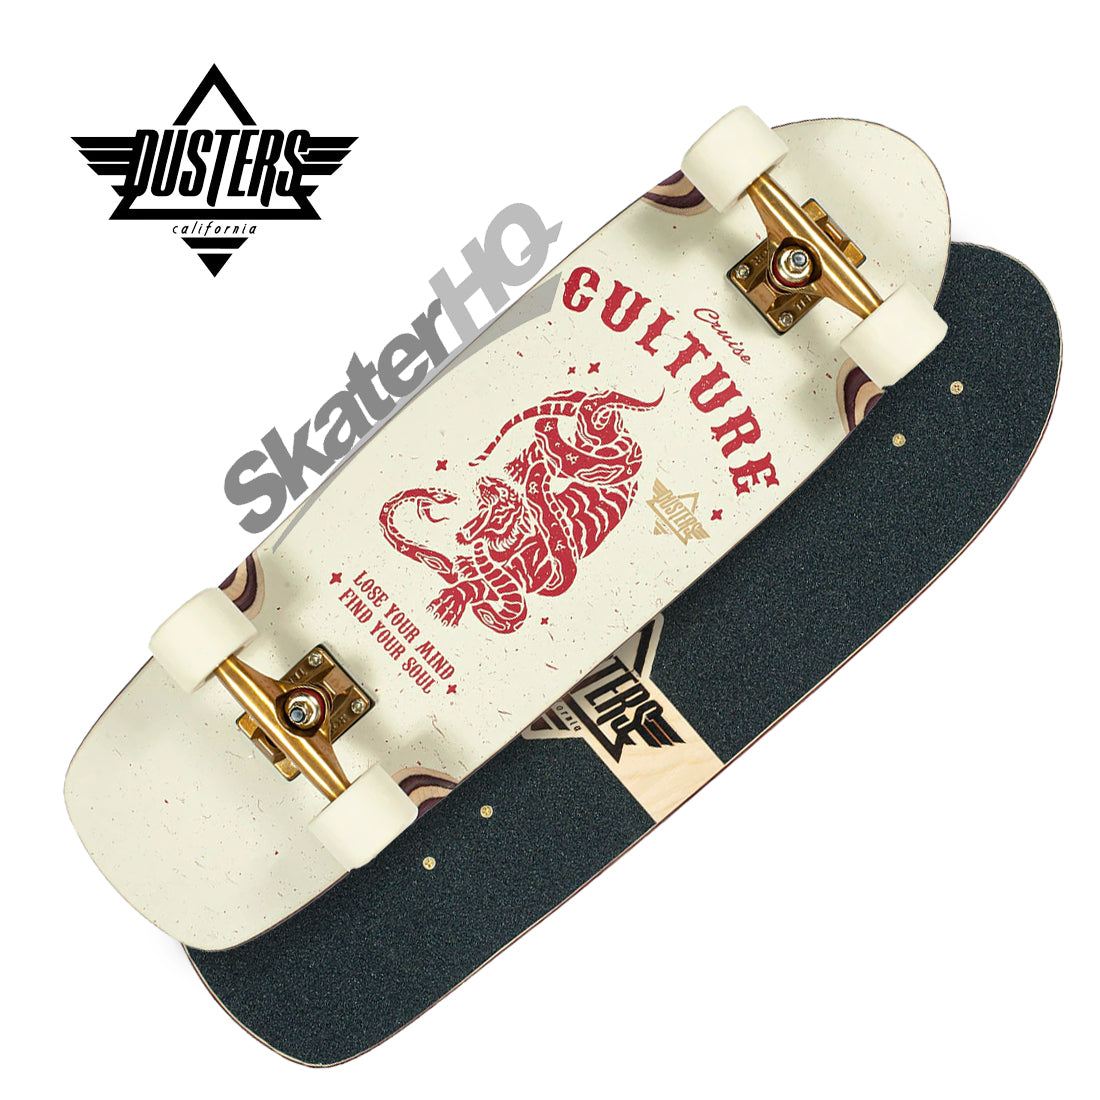 Dusters Culture Cruiser 29.5 Complete - Off White/Red Skateboard Compl Cruisers